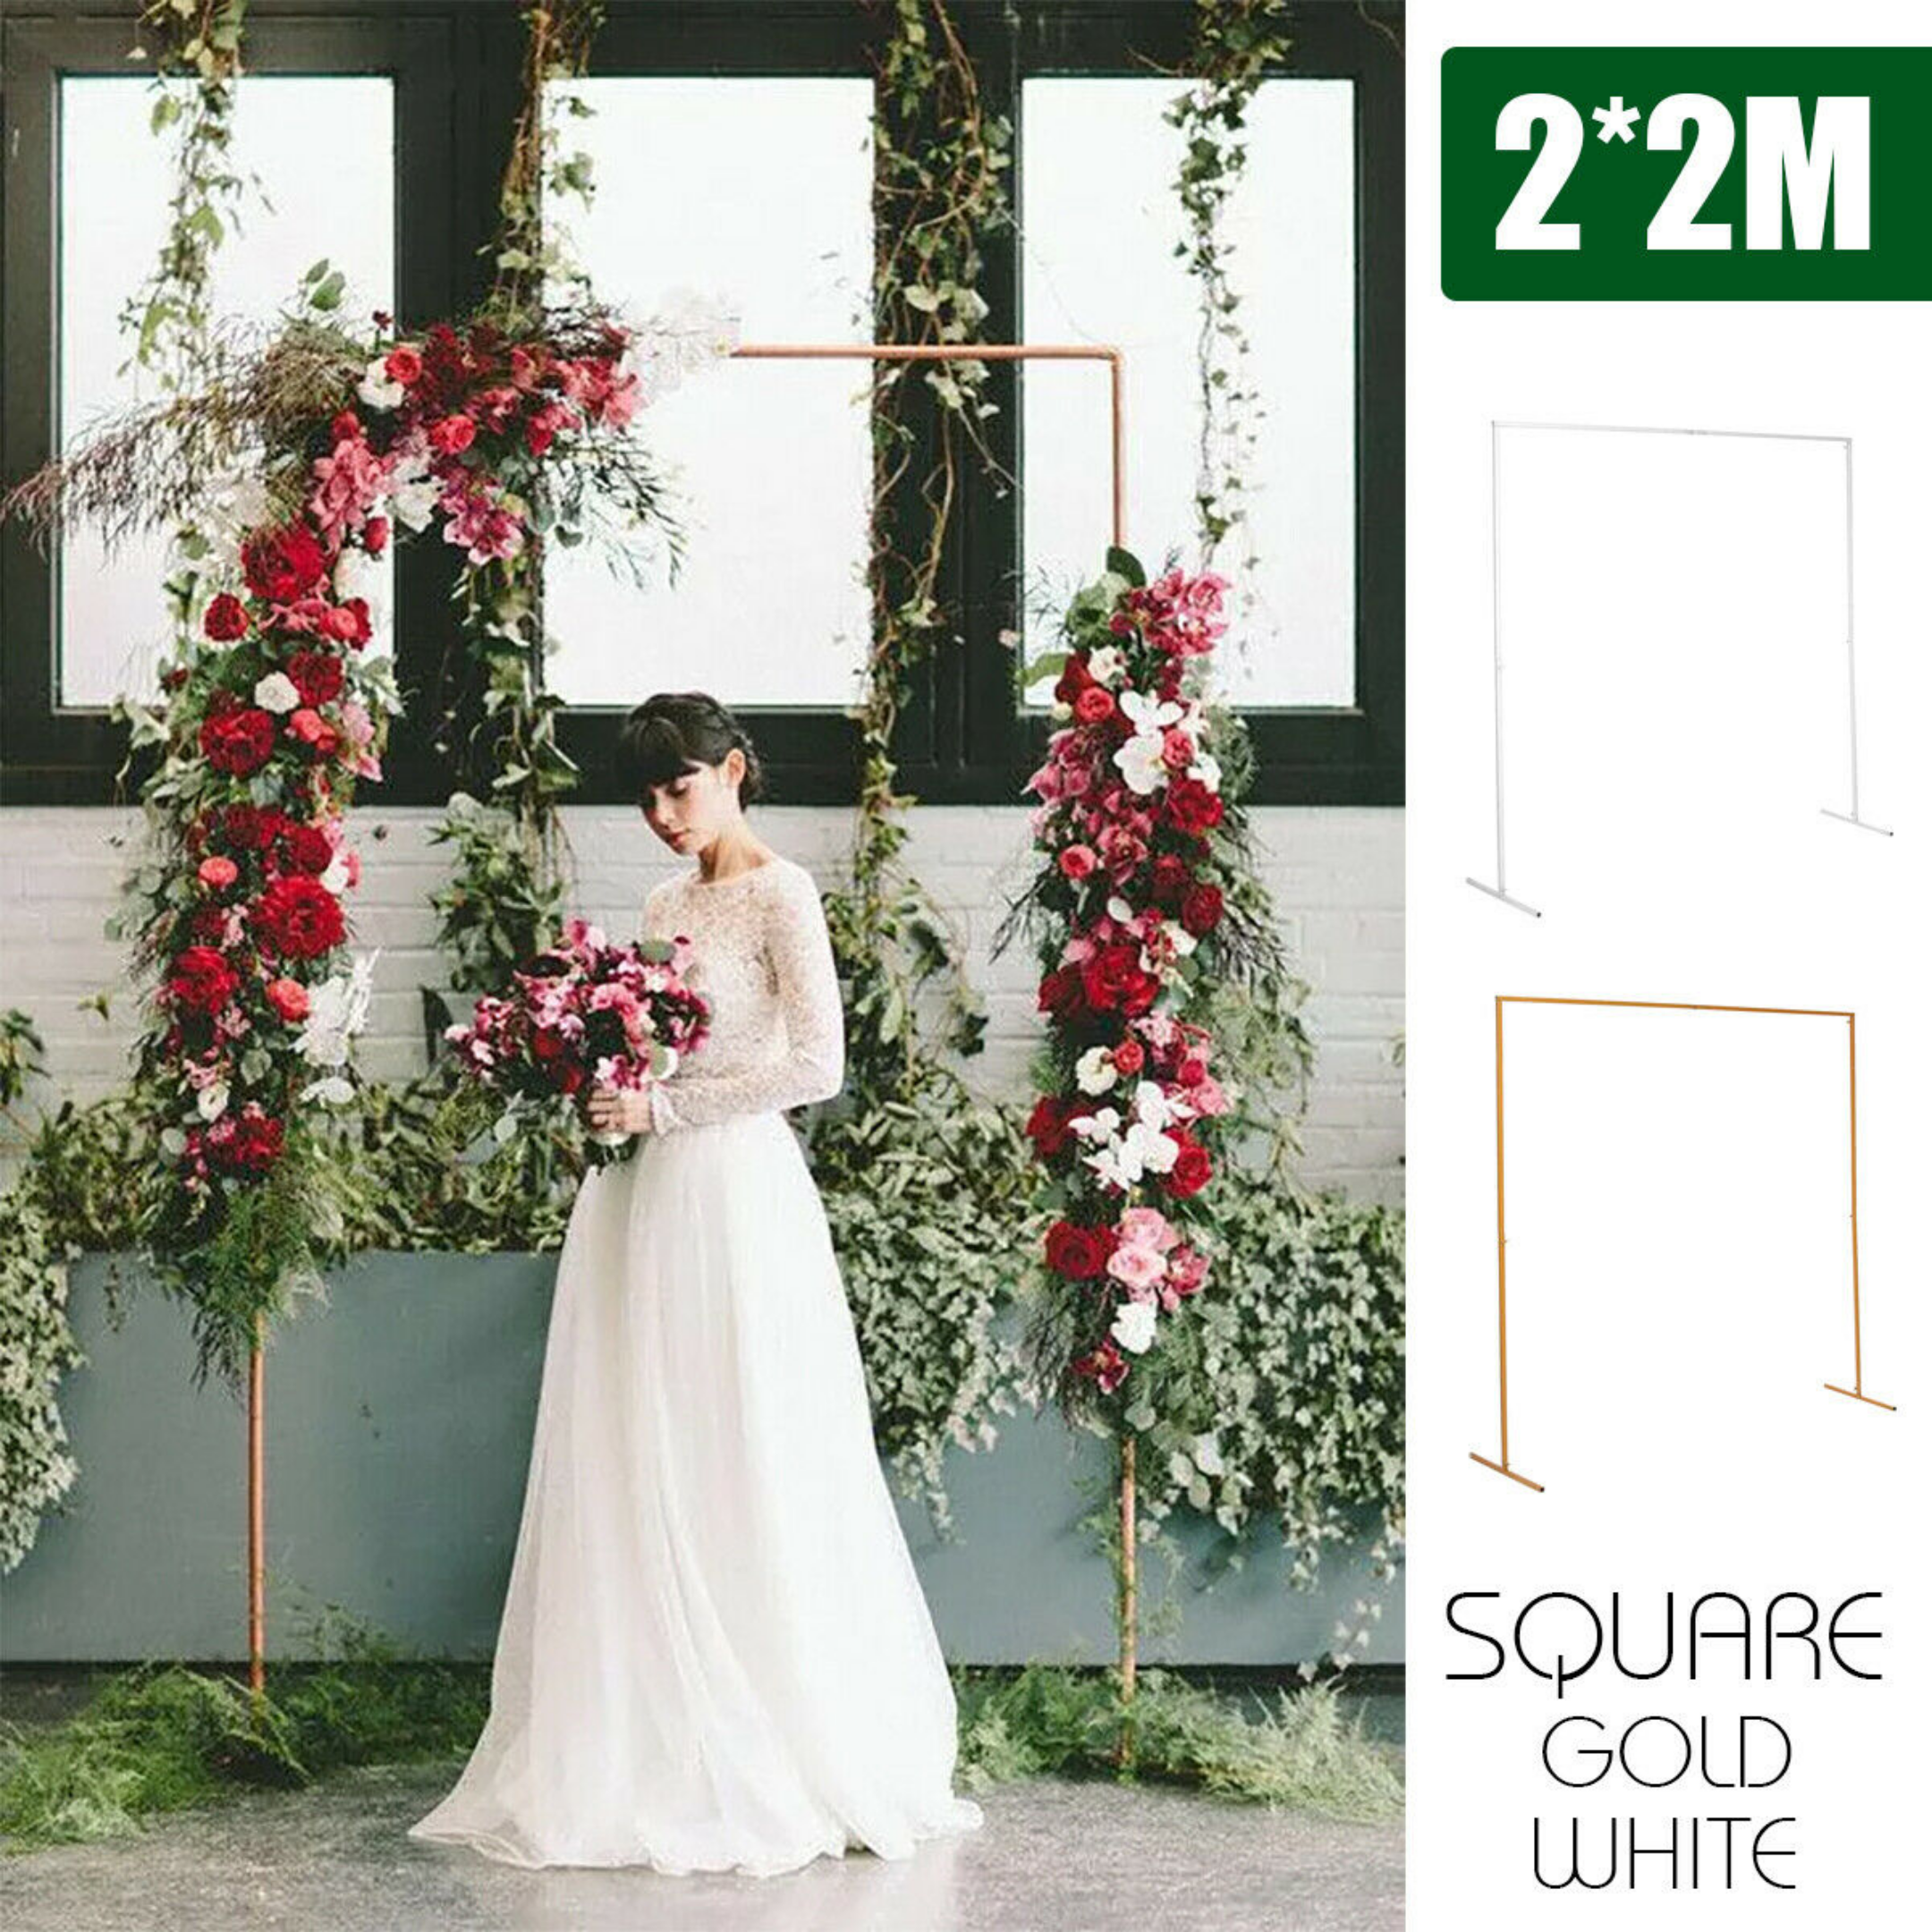 2M White Wedding Arch Square Backdrop Flower Display Stand Background AU